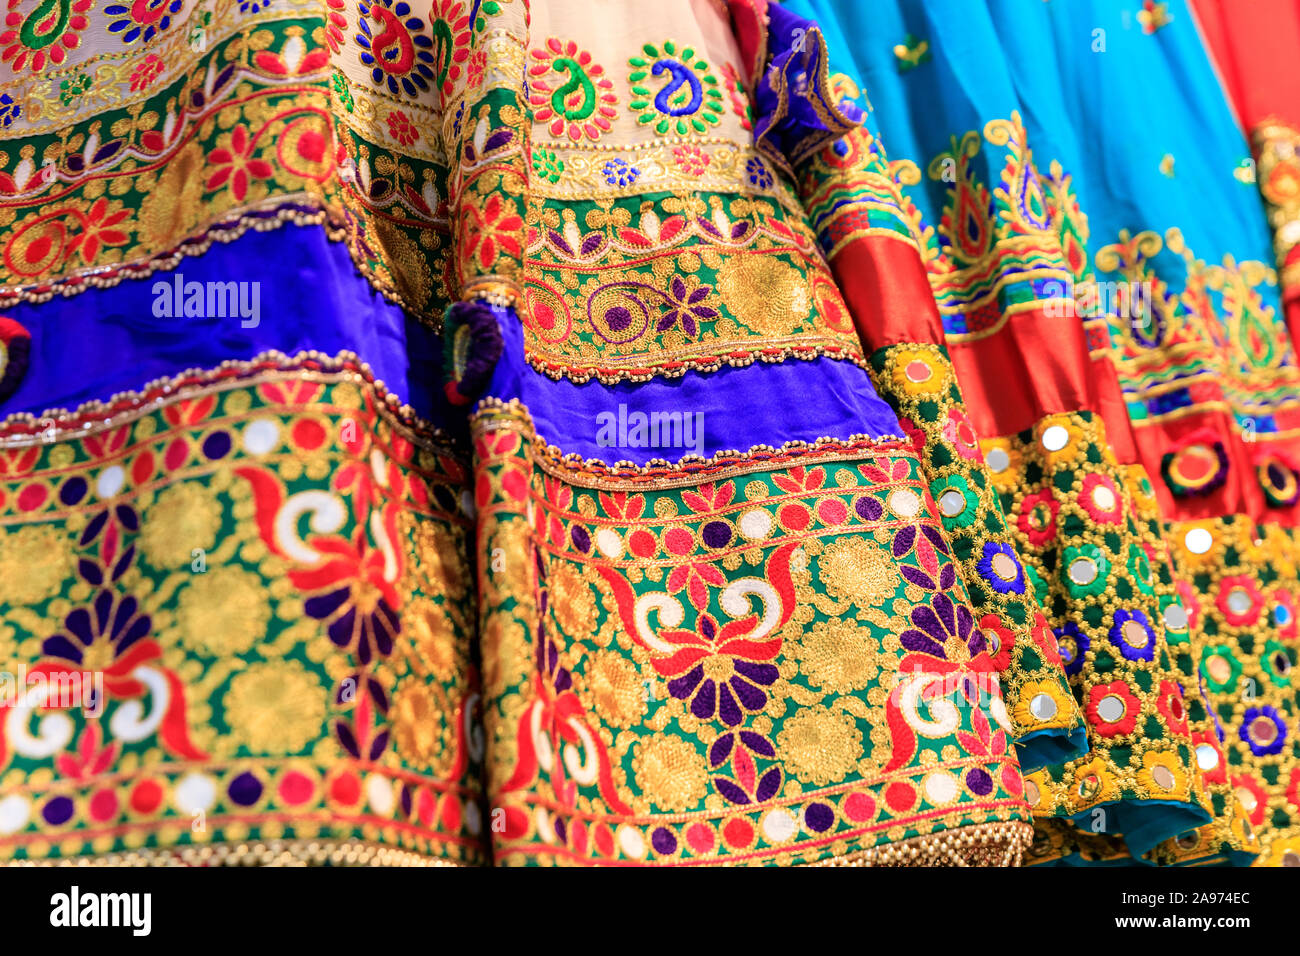 Afghani traditional dresses,detail shot of stitching and embroidery on colourful Afghan Asian clothing in shop display Stock Photo